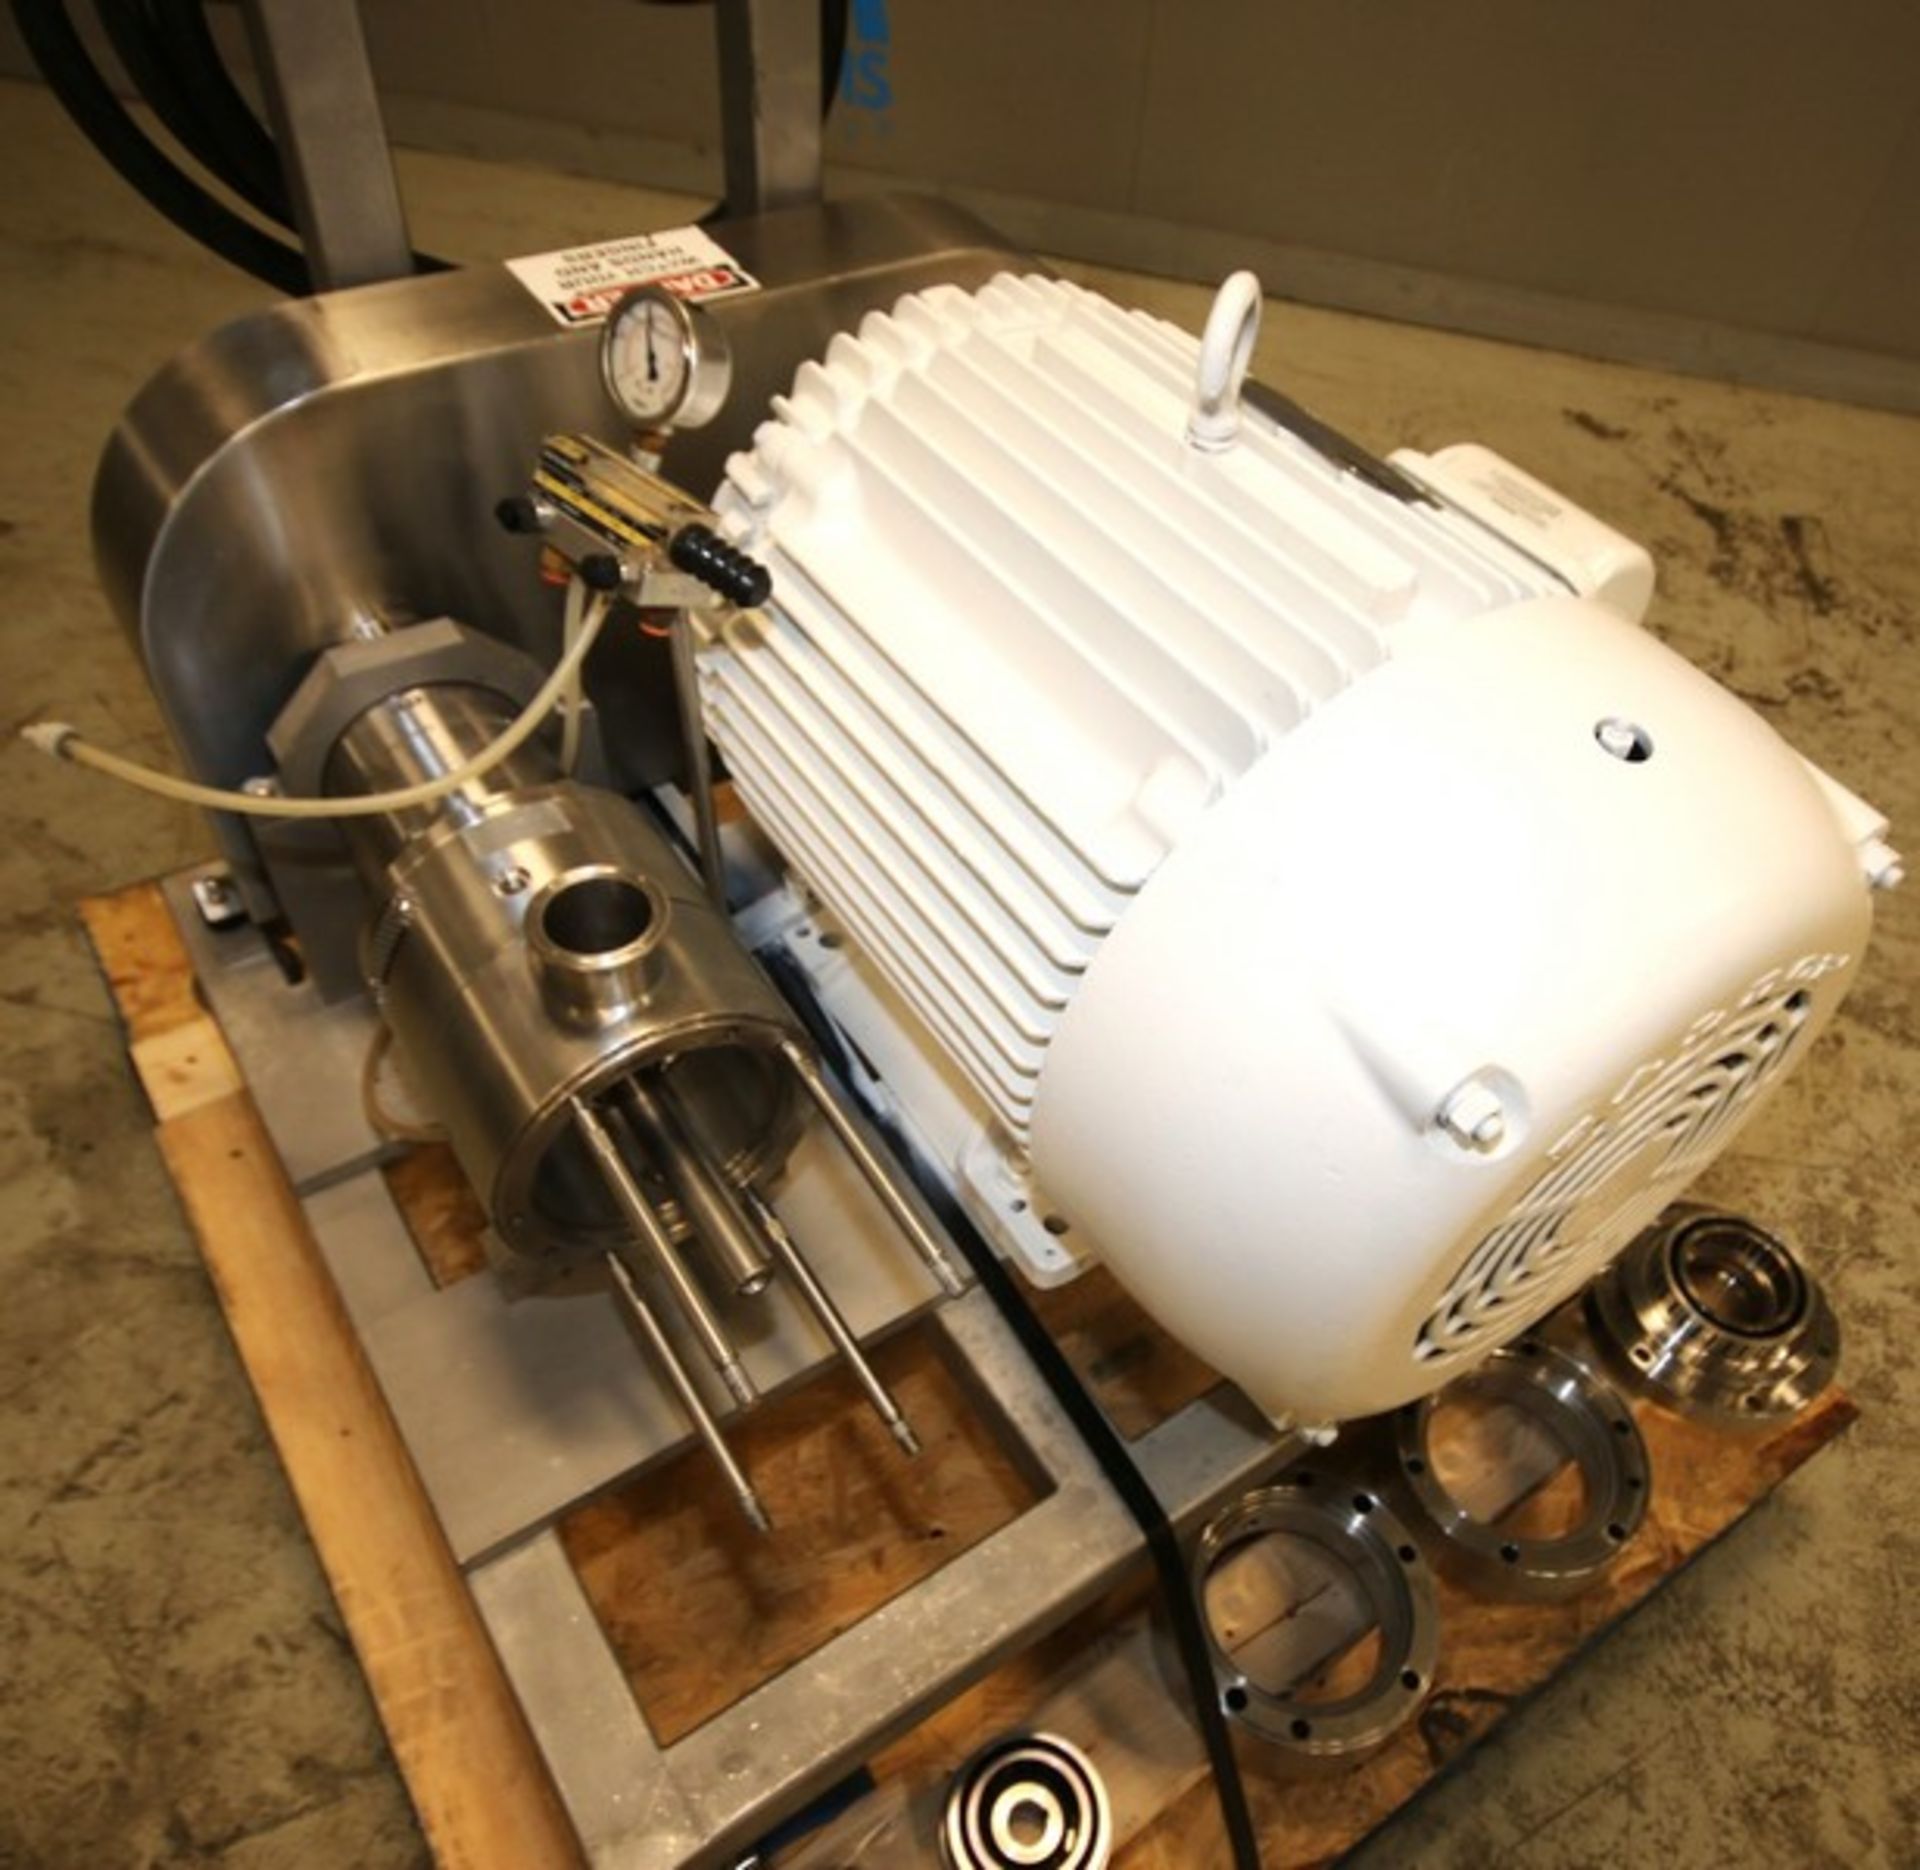 2020 Admix Boston S/S Shear Mill, Model QS-37-3, SN 66870-2, with 40 hp / 3545/5400 rpm Motor, 460 - Image 3 of 12